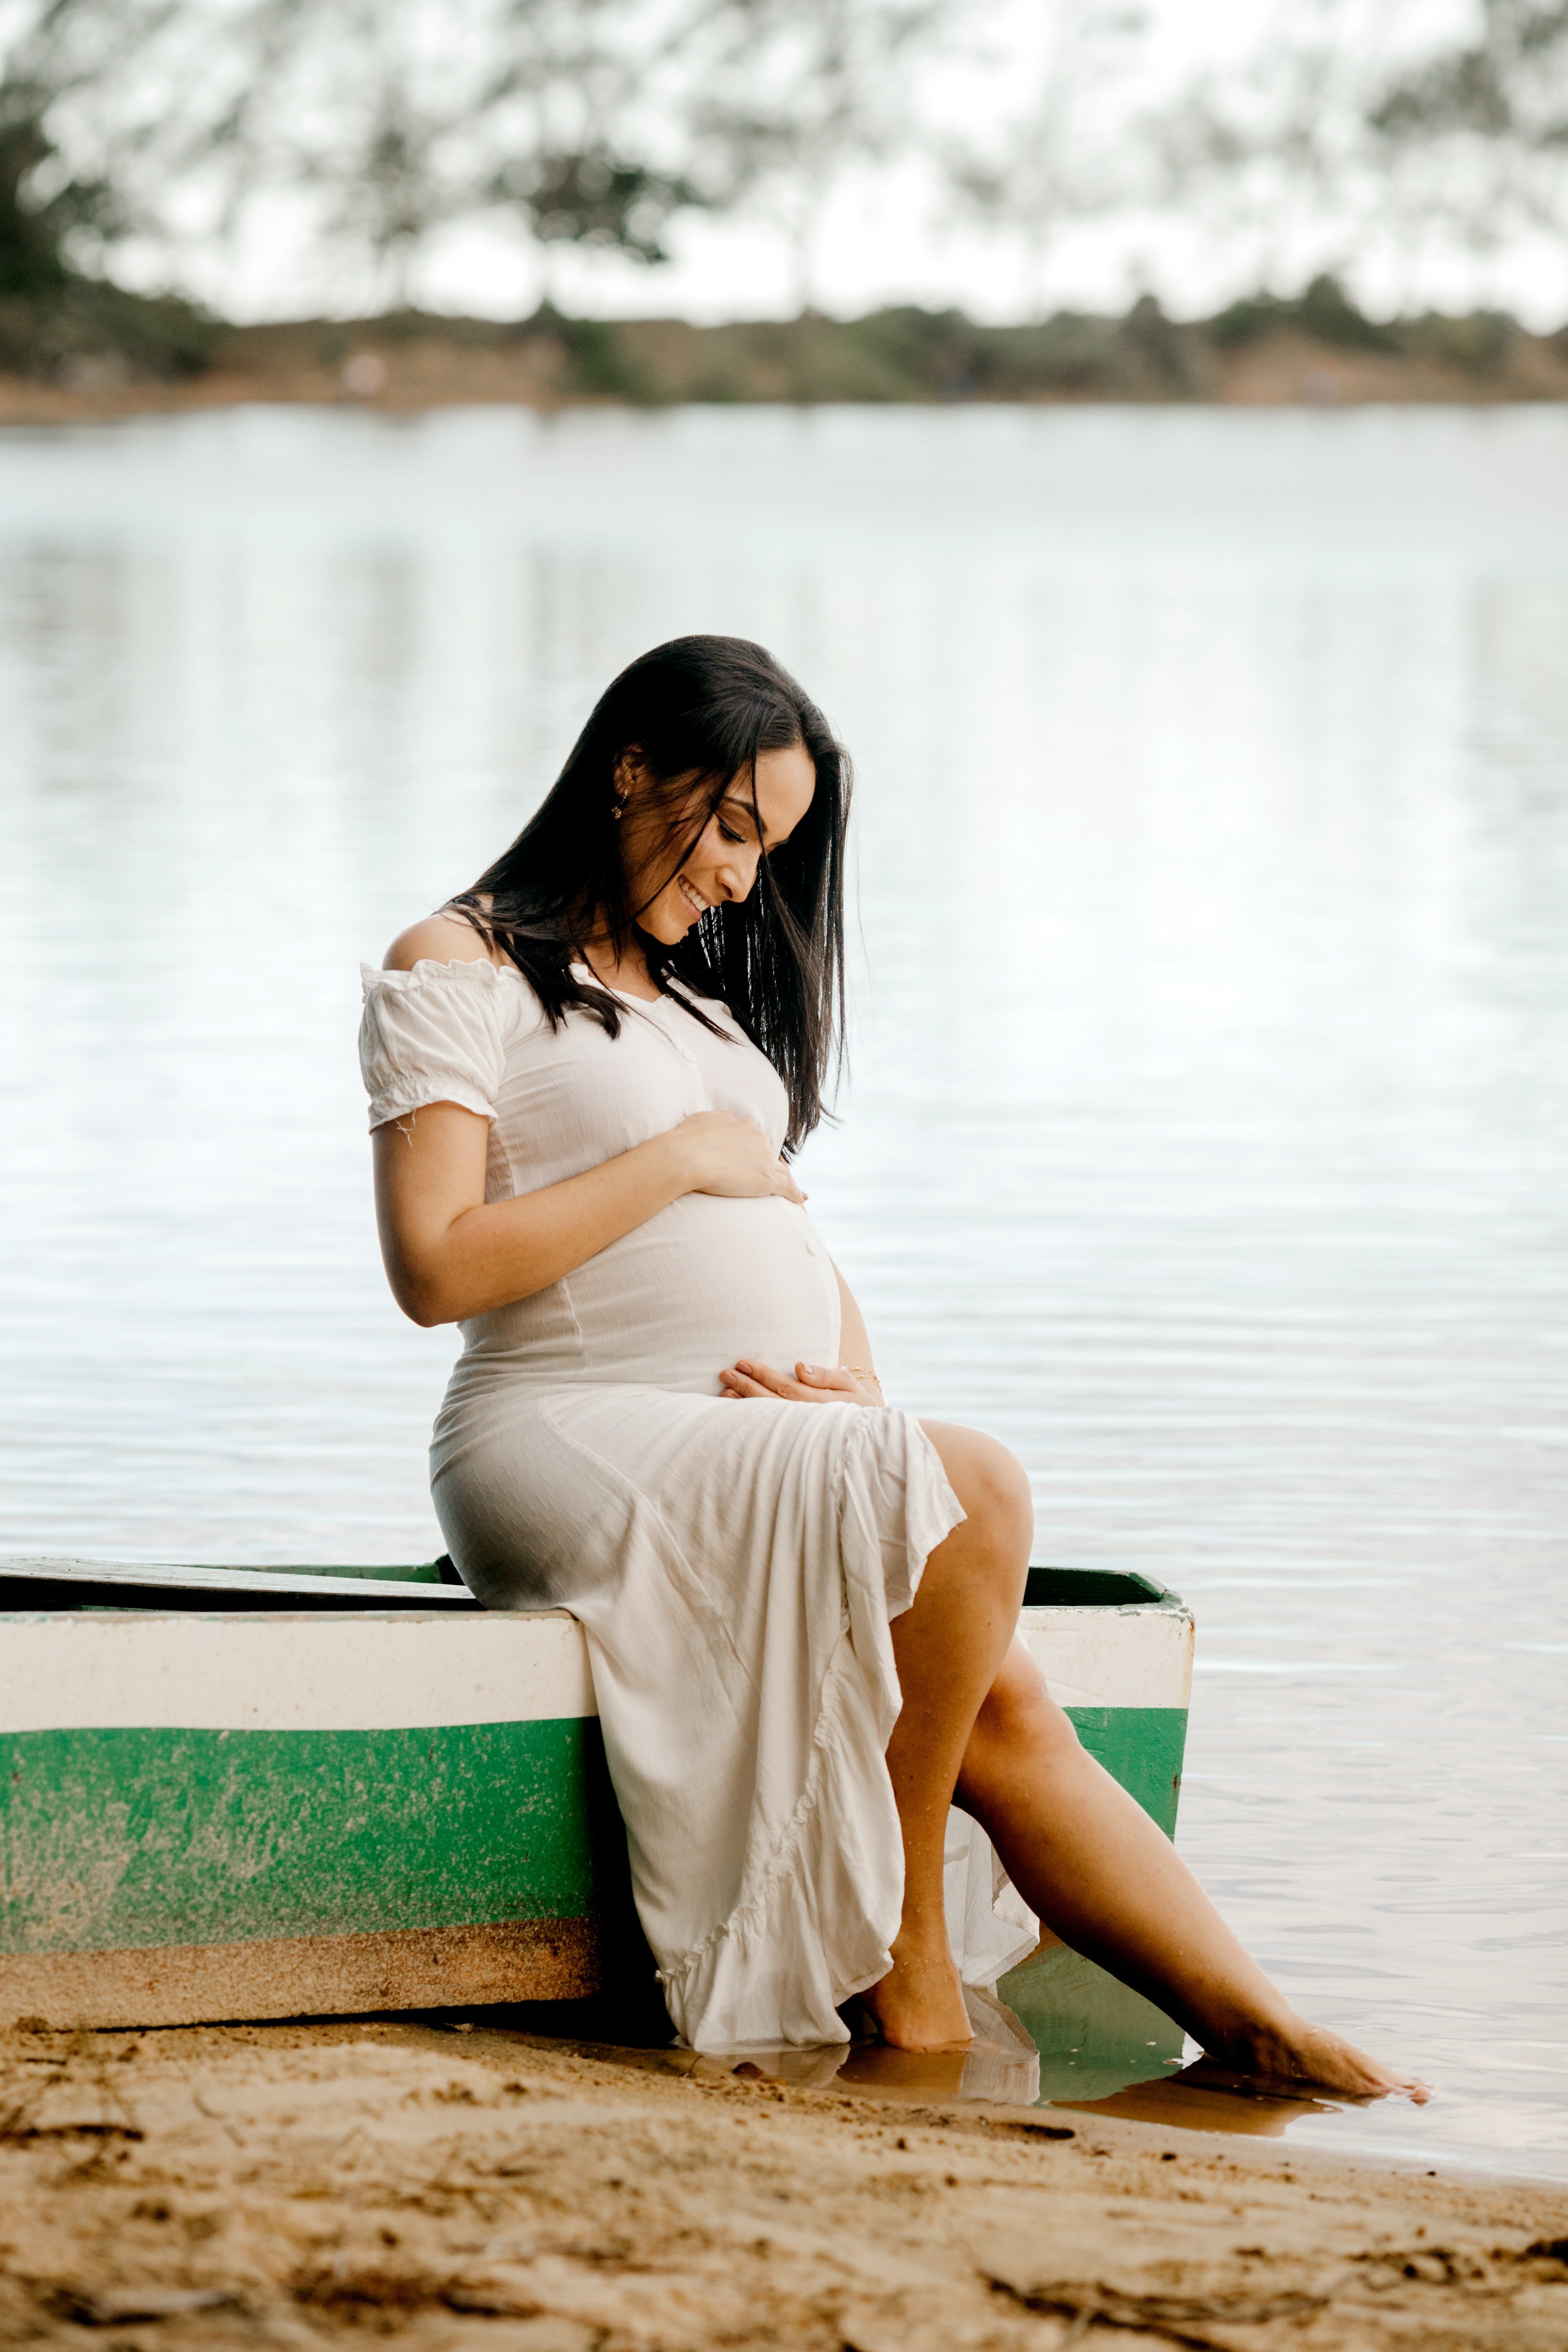 Sally was thrilled to be pregnant.  |  Source: Unsplash